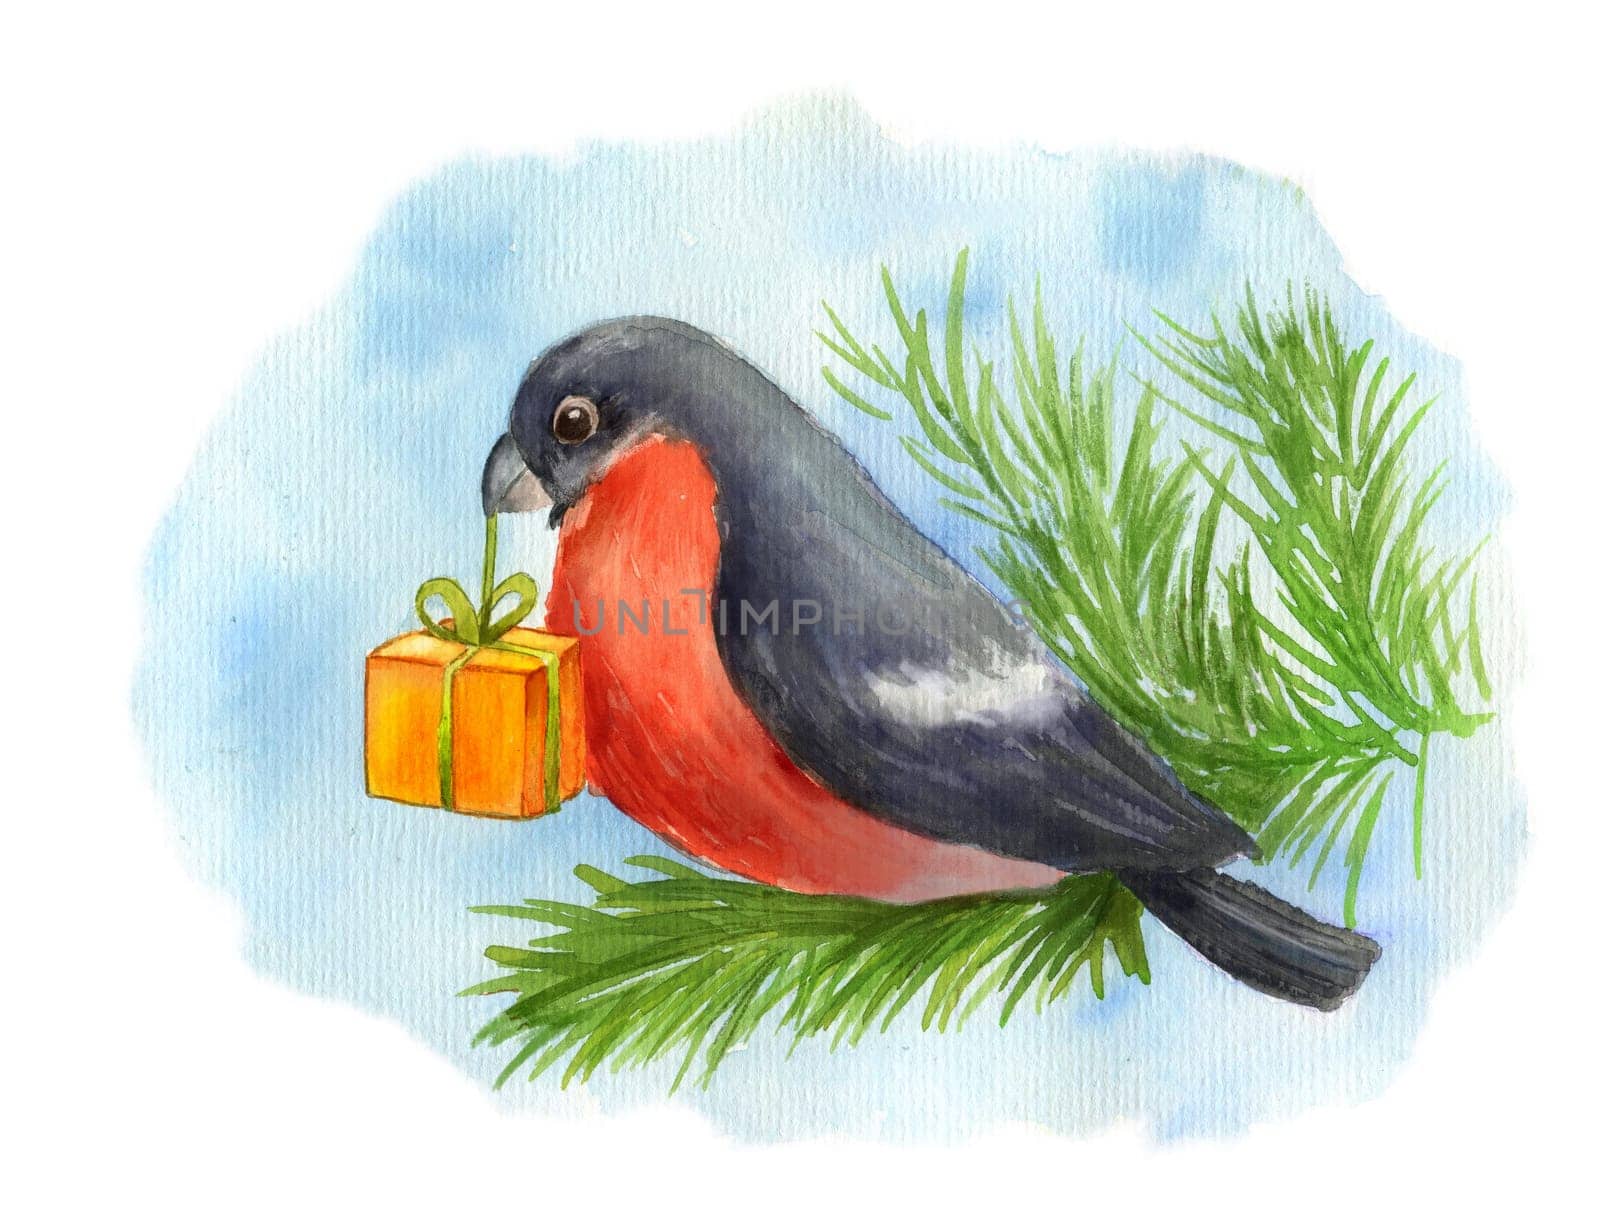 Bullfinch bird on pine branch with gift box. Watercolor illustration on blue background for card. Forest little songbird by ElenaPlatova